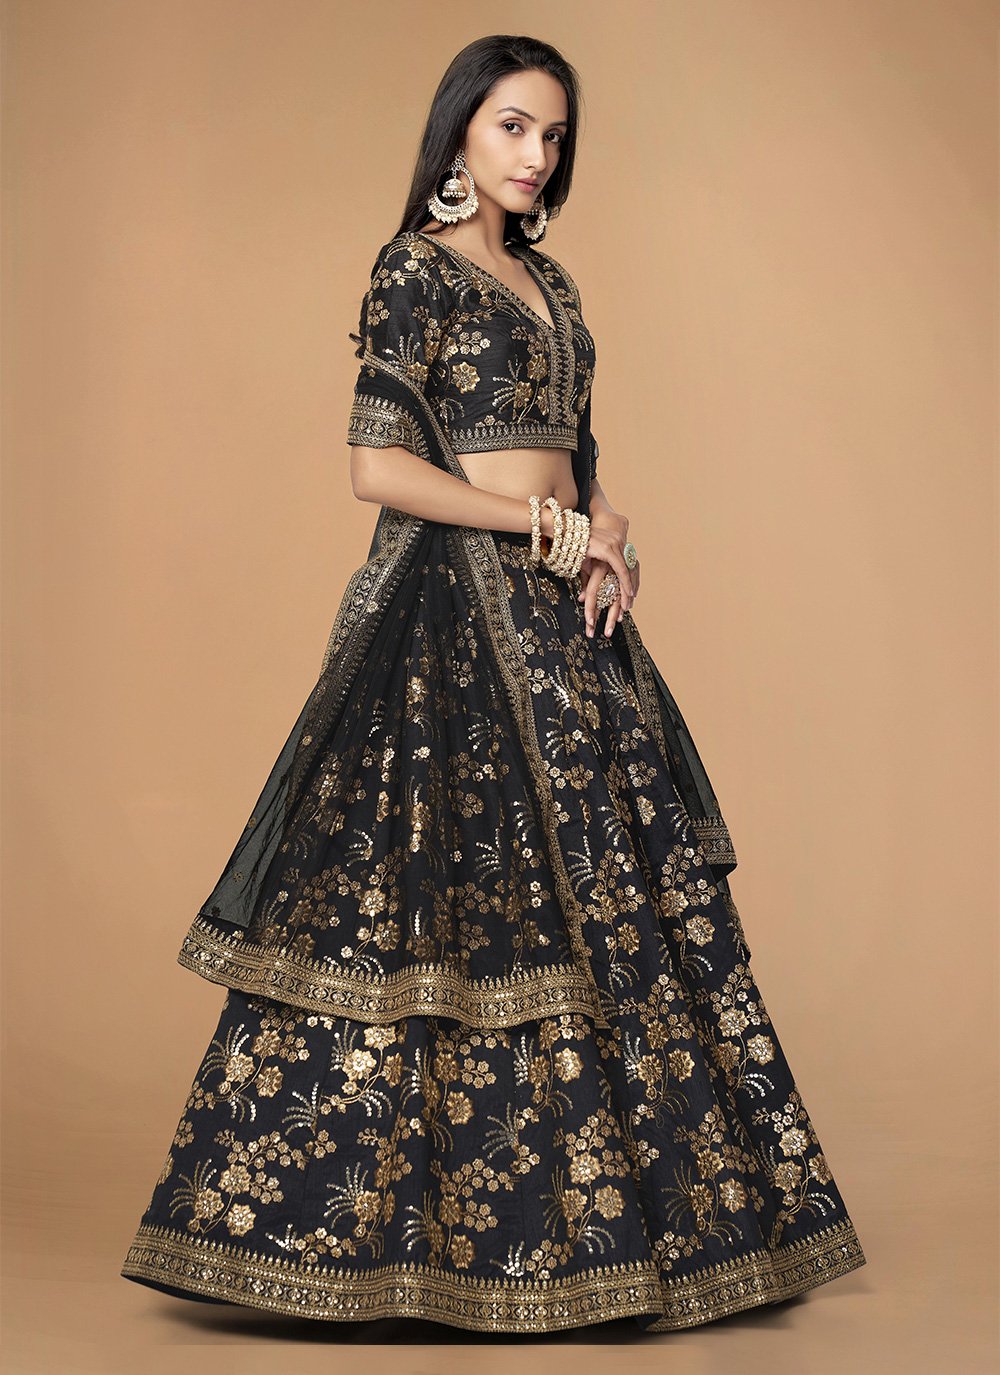 Beautiful Black Bridal Lehenga with Makeup for Party Wear